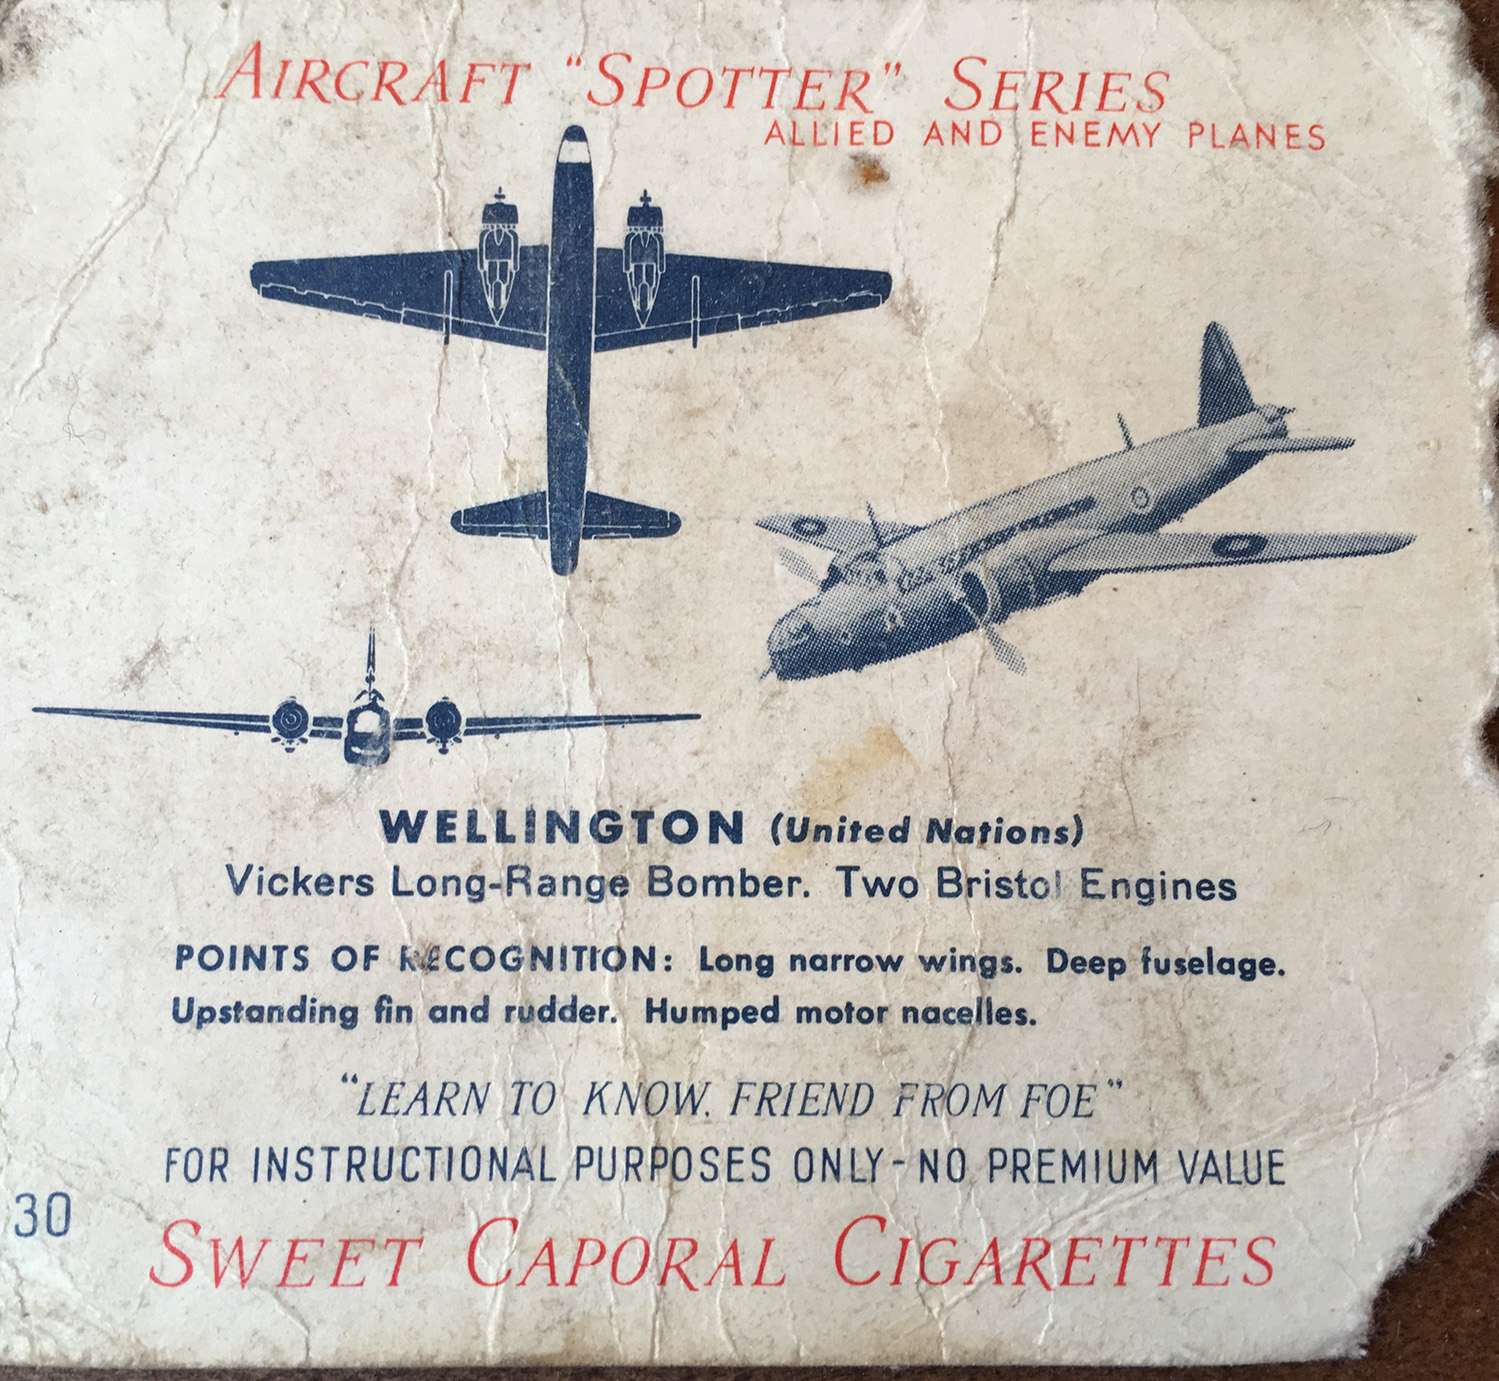  Cigarette package during WWII. 